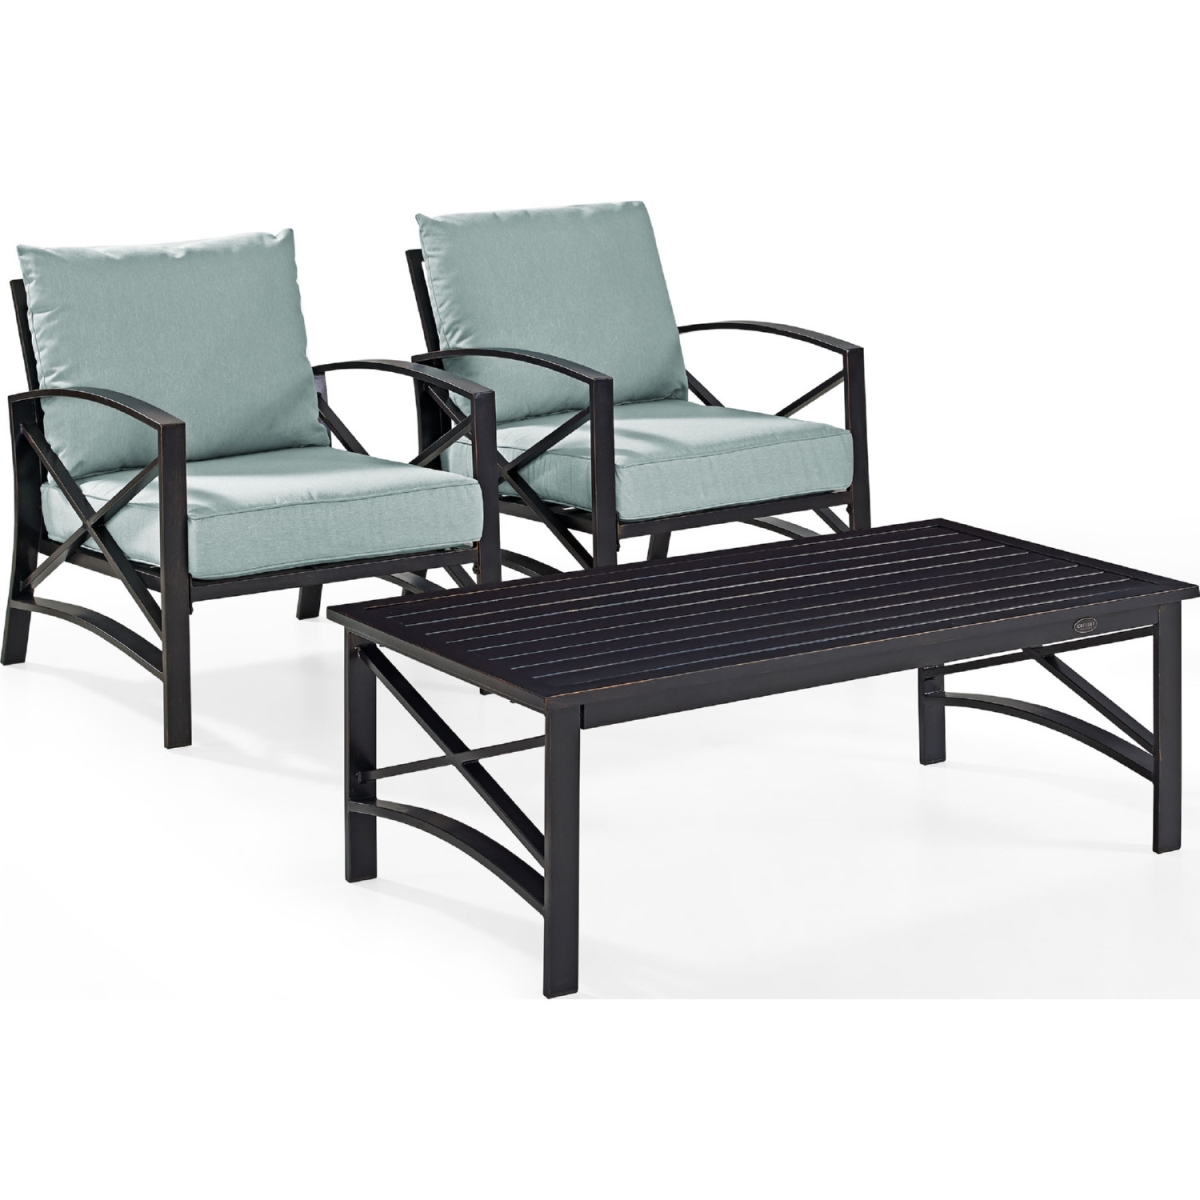 3 Piece Kaplan Outdoor Seating Set With Mist Cushion - Two Kaplan Outdoor Chairs, Coffee Table